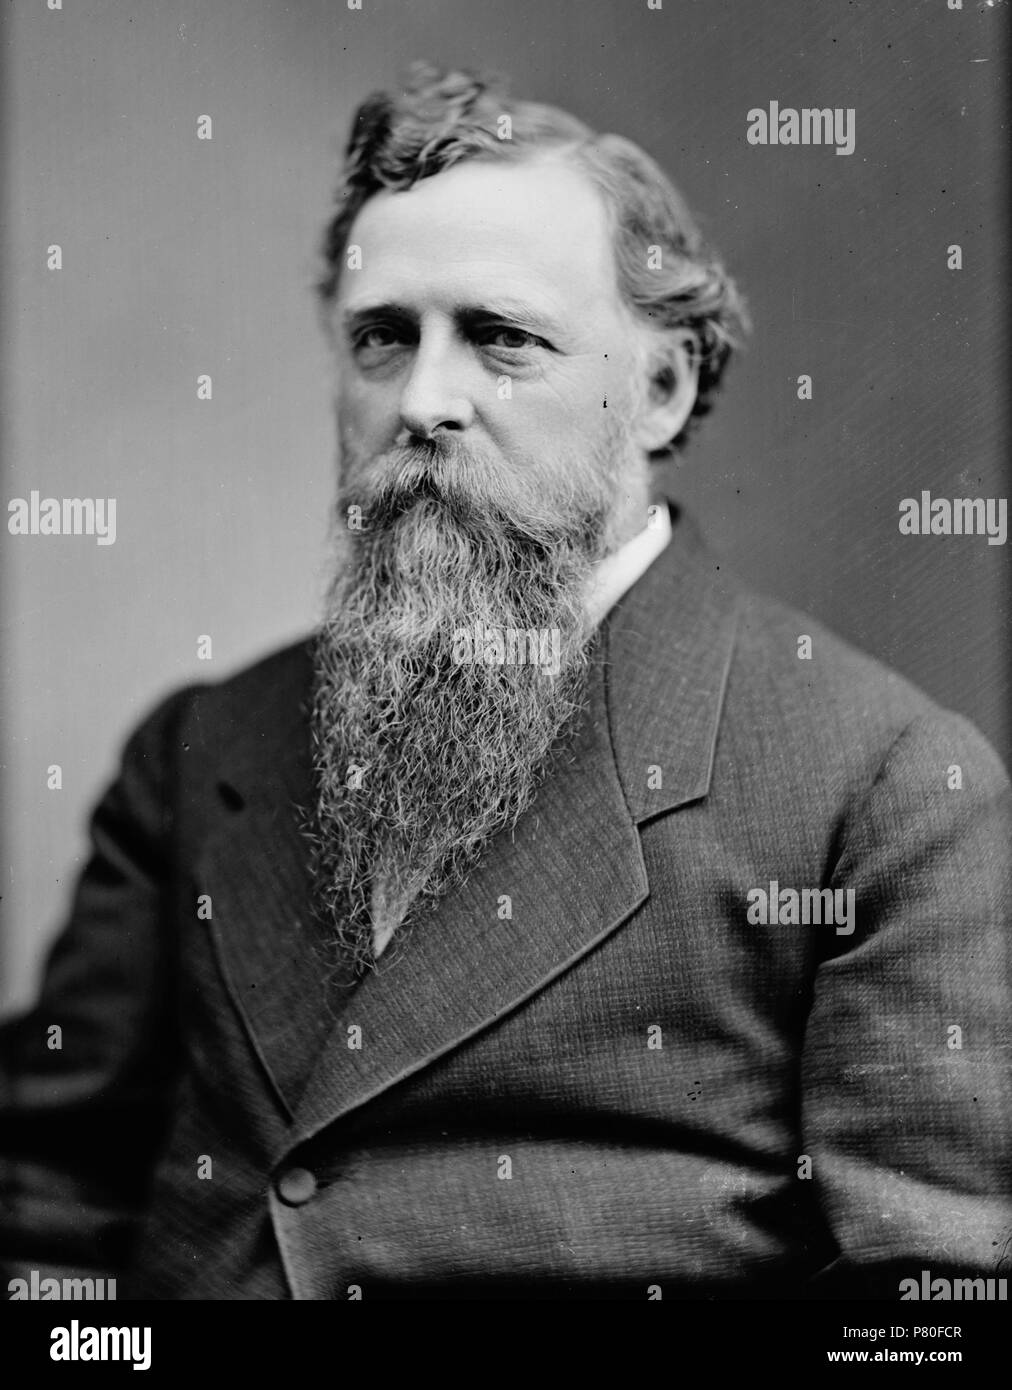 Thaddeus C. Pound (1833–1914). Member of the Wisconsin State Assembly and the Wisconsin State Senate, Lieutenant Governor of Wisconsin 1870–1872, member of the United States House of Representatives from Wisconsin from 1877 until 1883. Library of Congress description of photograph: 'Pound, Hon. Thad C. of Wisc.'. between 1865 and 1880 319 Thaddeus C. Pound - Brady-Handy Stock Photo